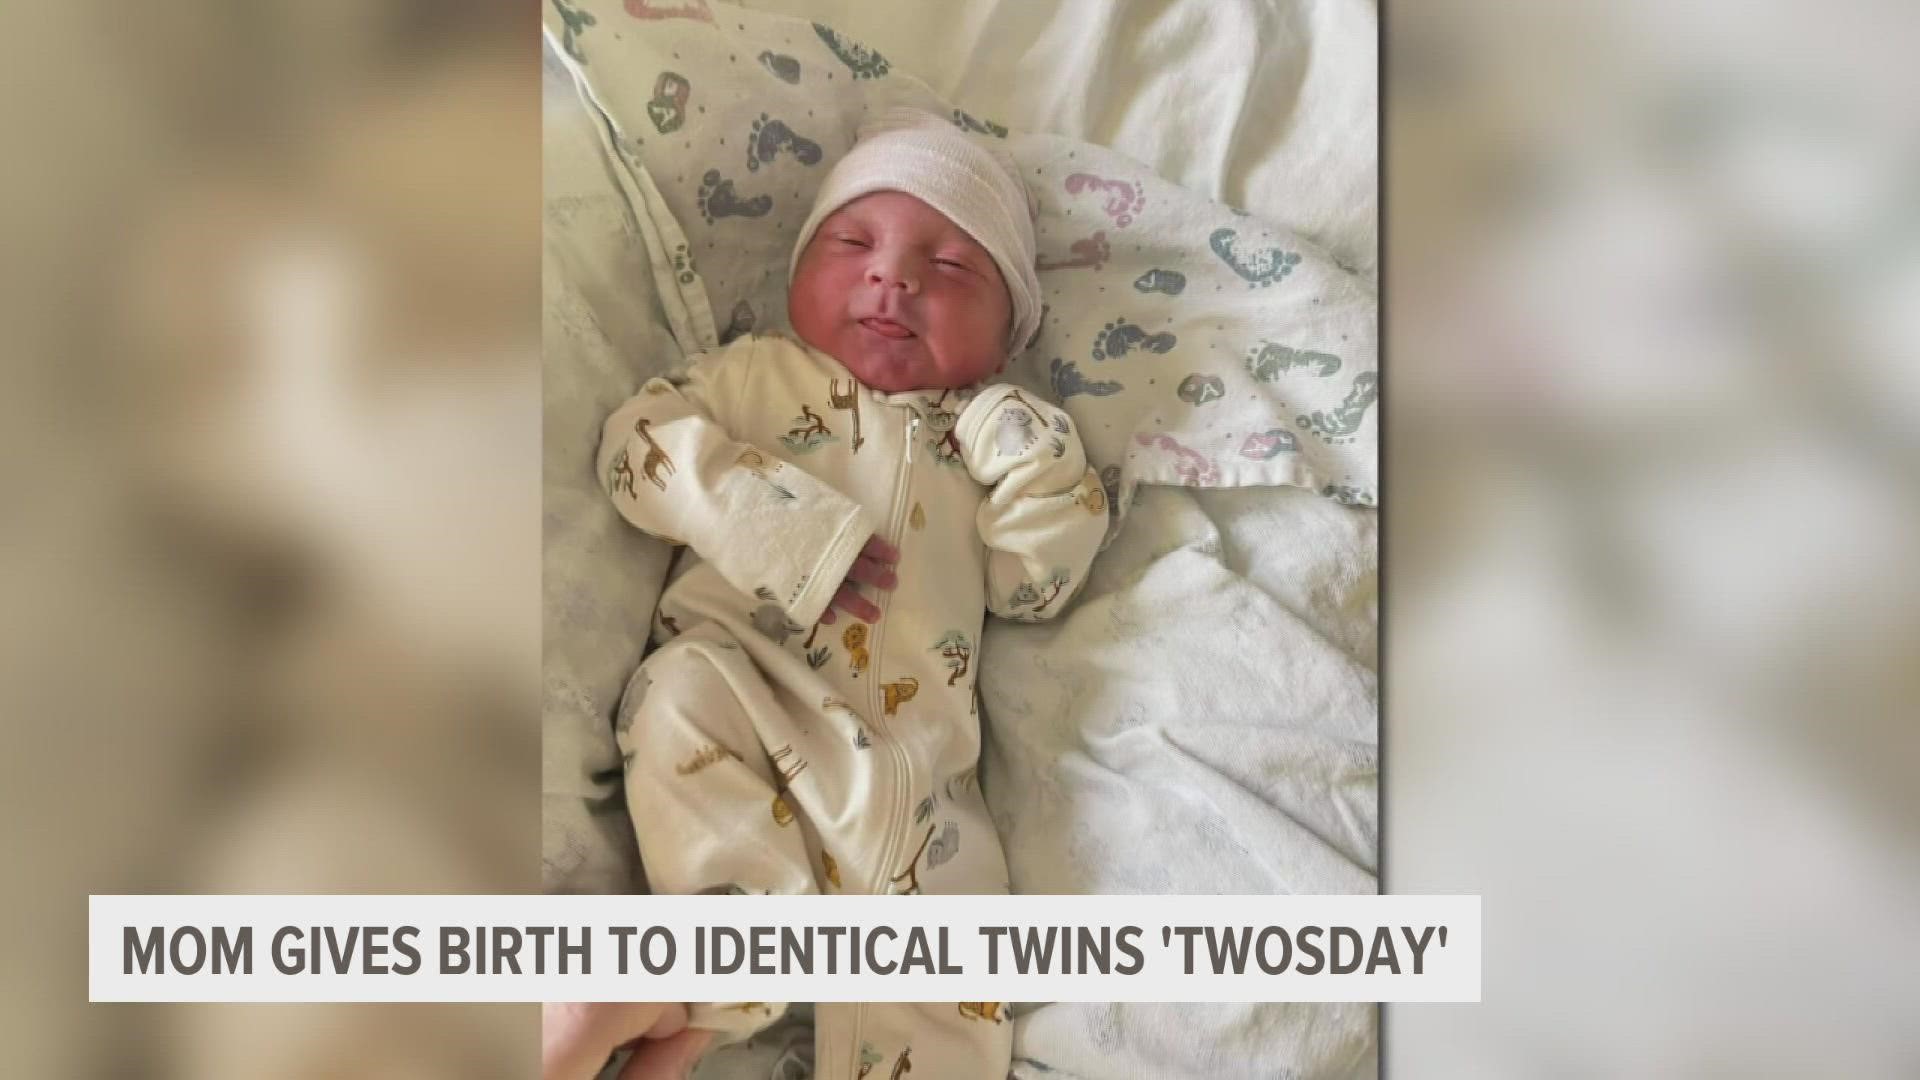 The identical twin boys were born nearly four and a half hours apart, but both managed to make it out during the palindrome date.